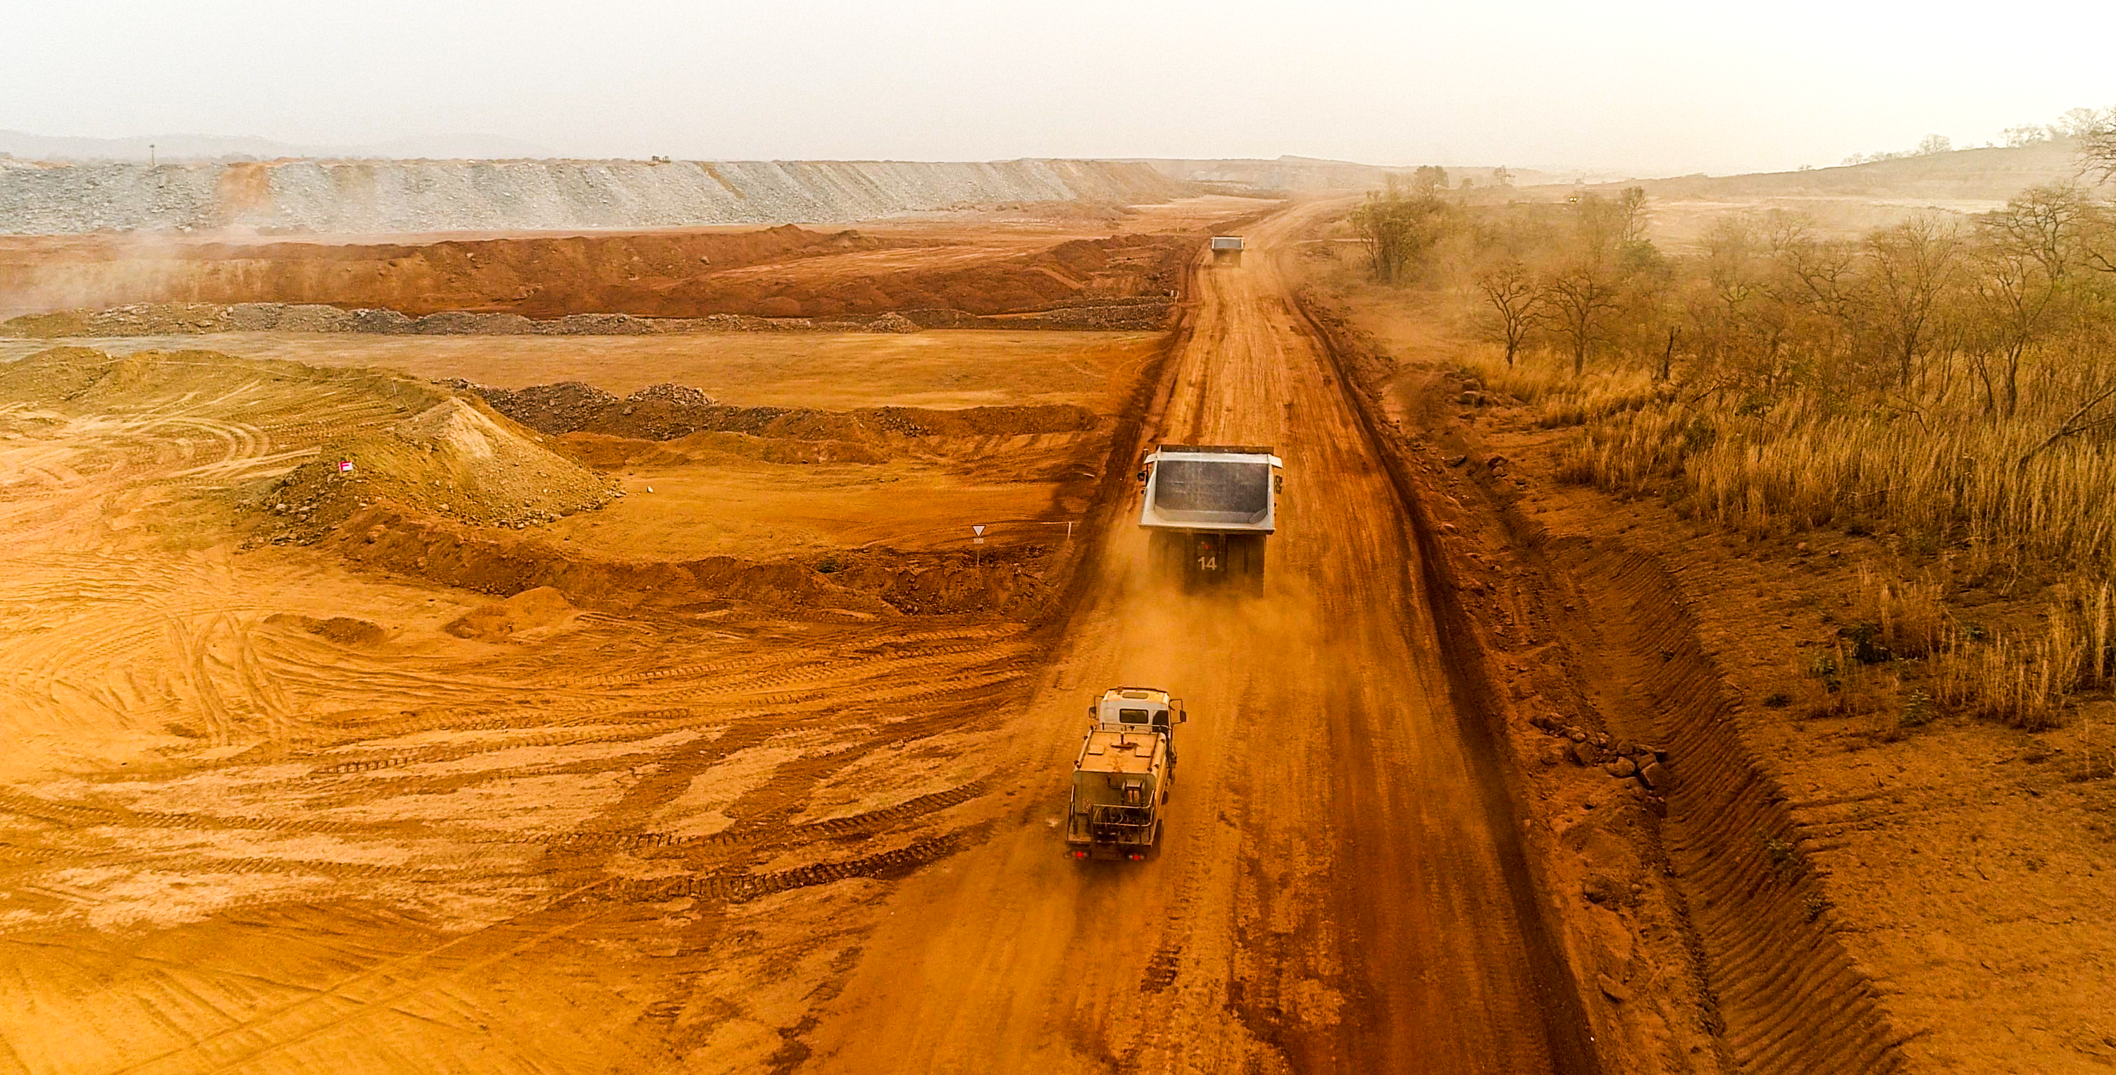 Trucks driving on the road near the mine in Senegal